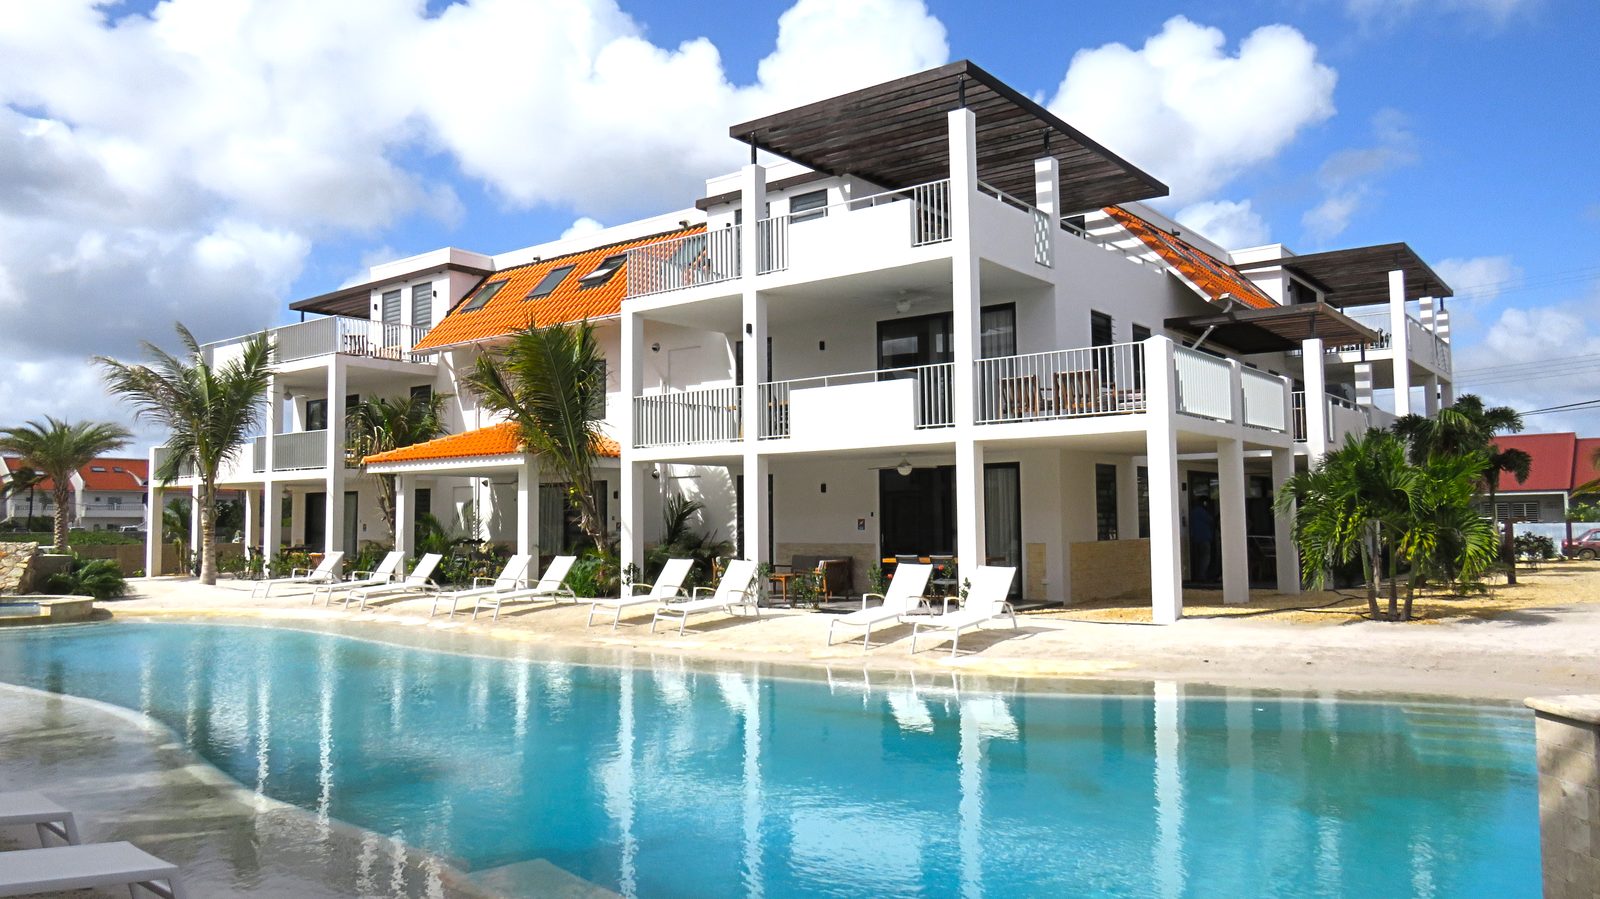 Looking for a stay on Bonaire? Choose Resort Bonaire. A new, luxurious resort with apartments that offer everything you need.